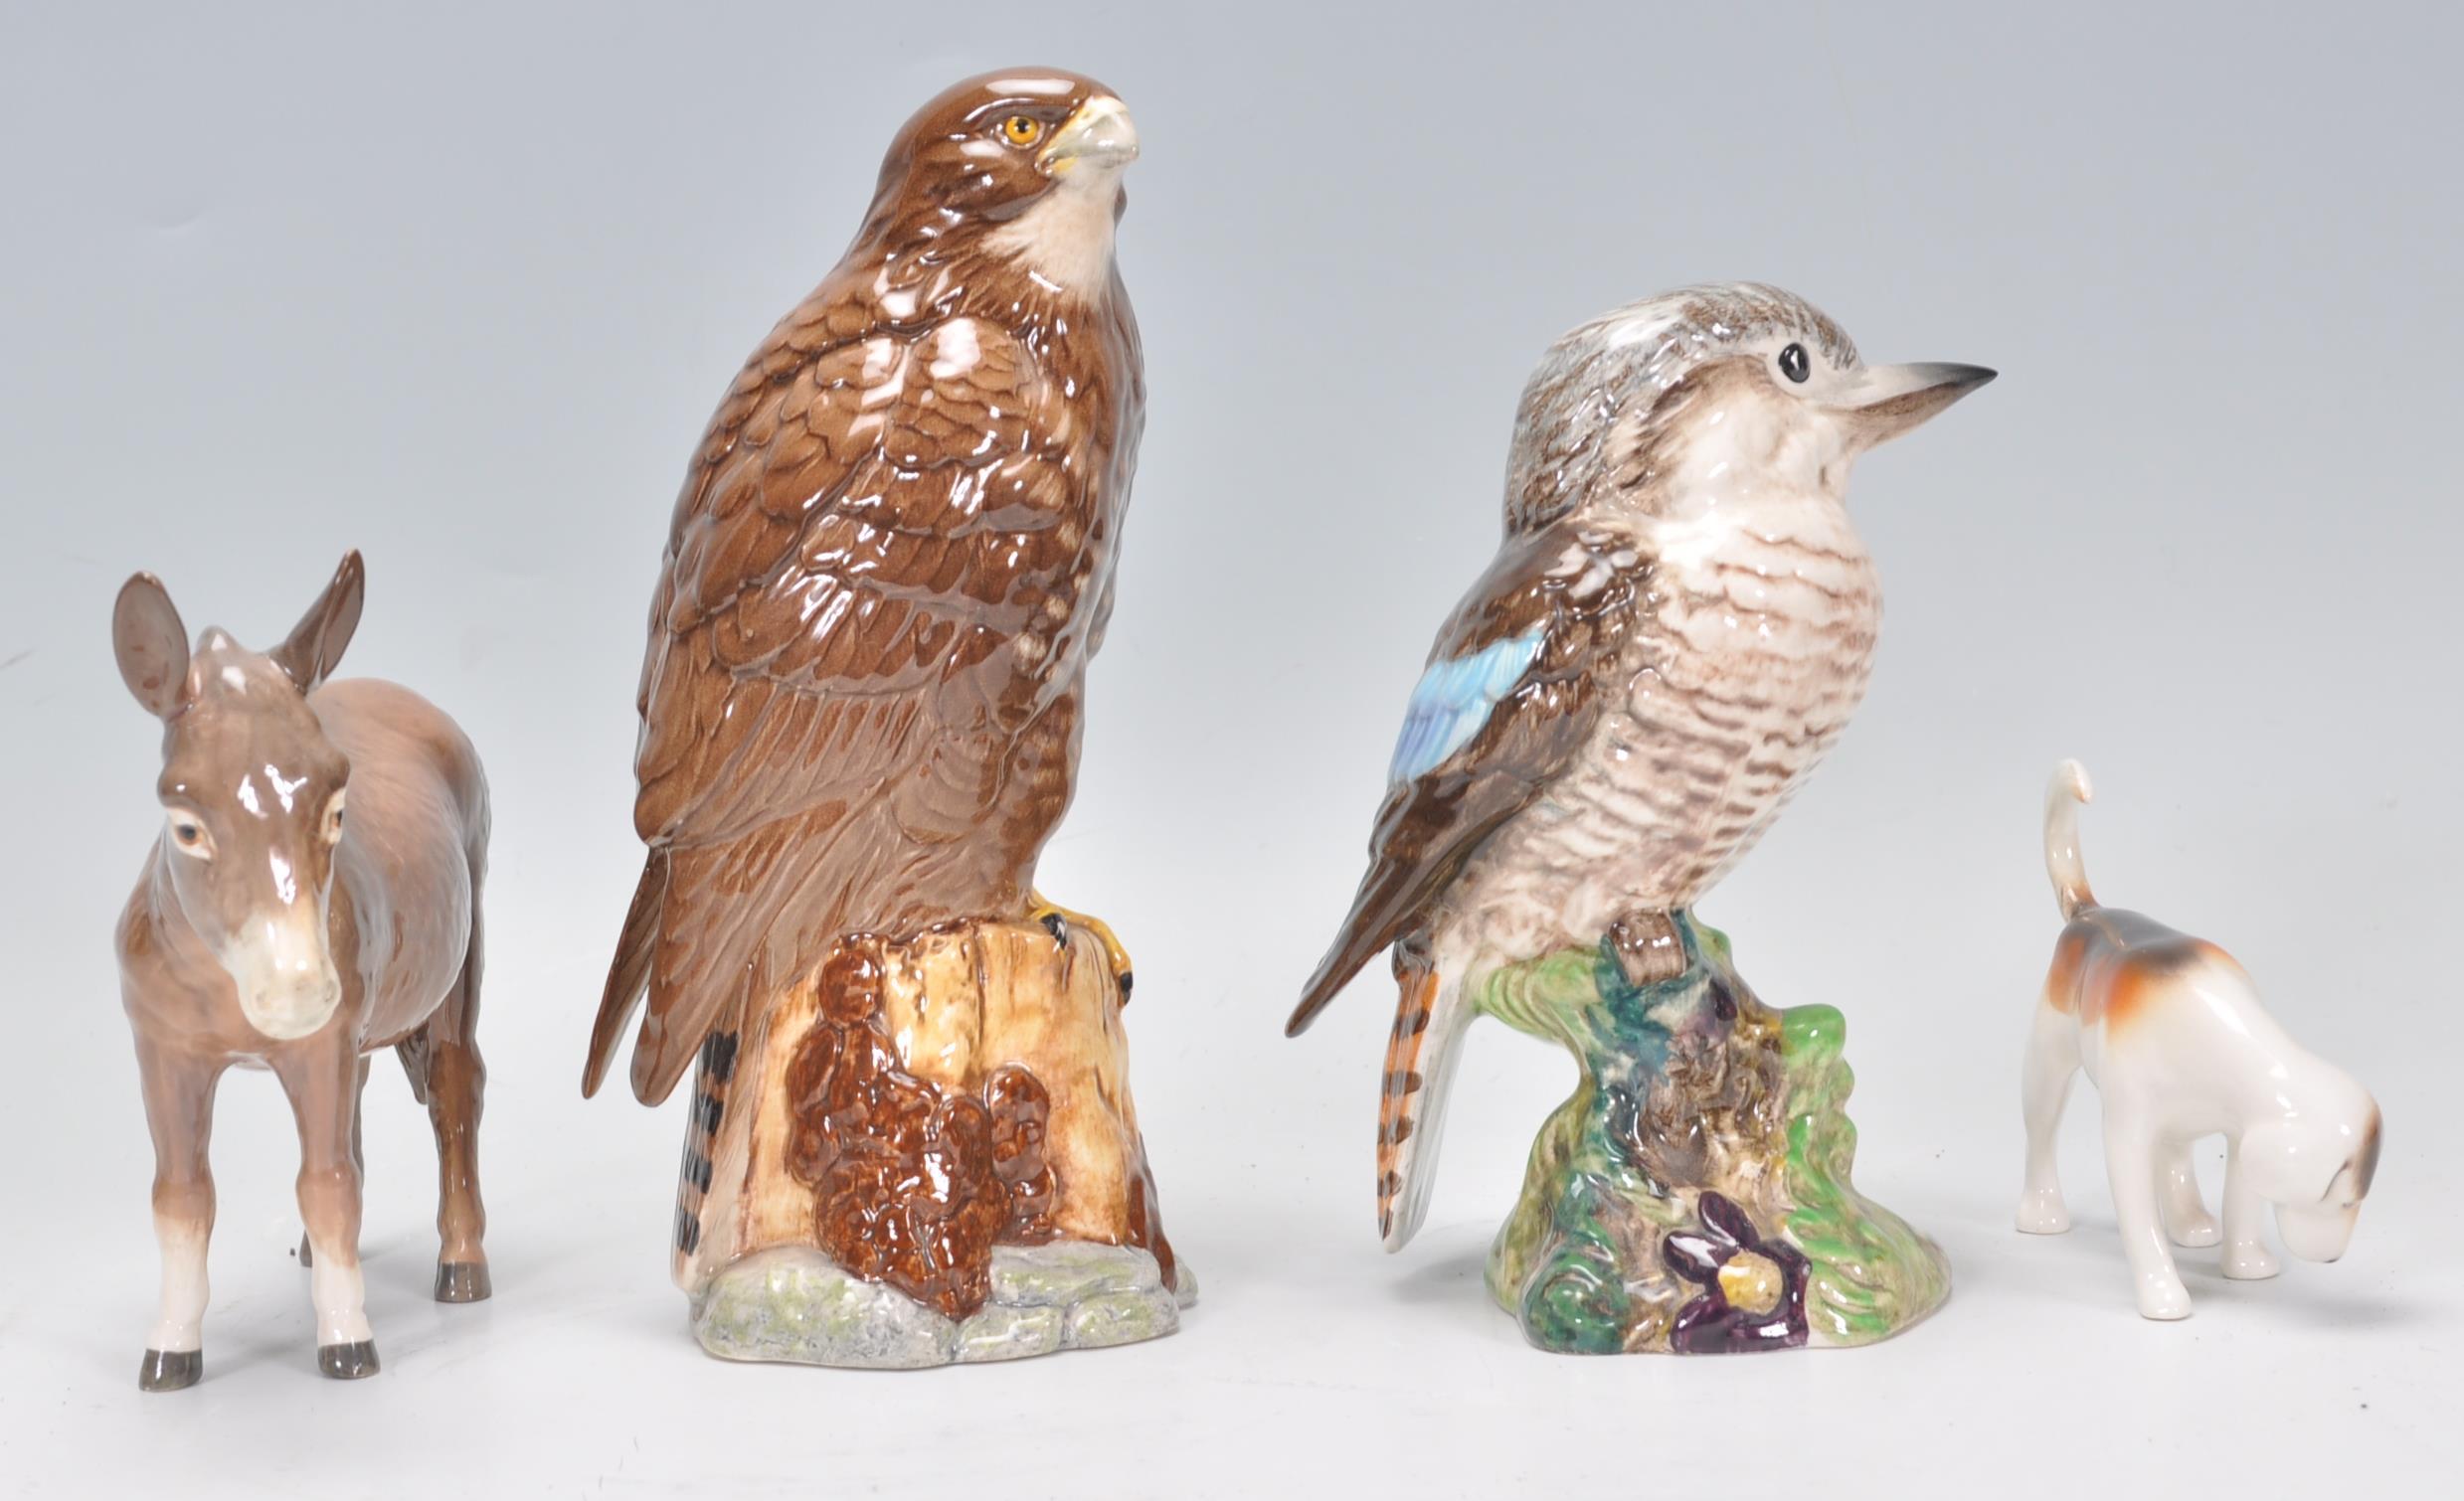 A collection of Beswick porcelain figurines to include a Cuckoo, hound, donkey and an Eagle being - Image 2 of 7